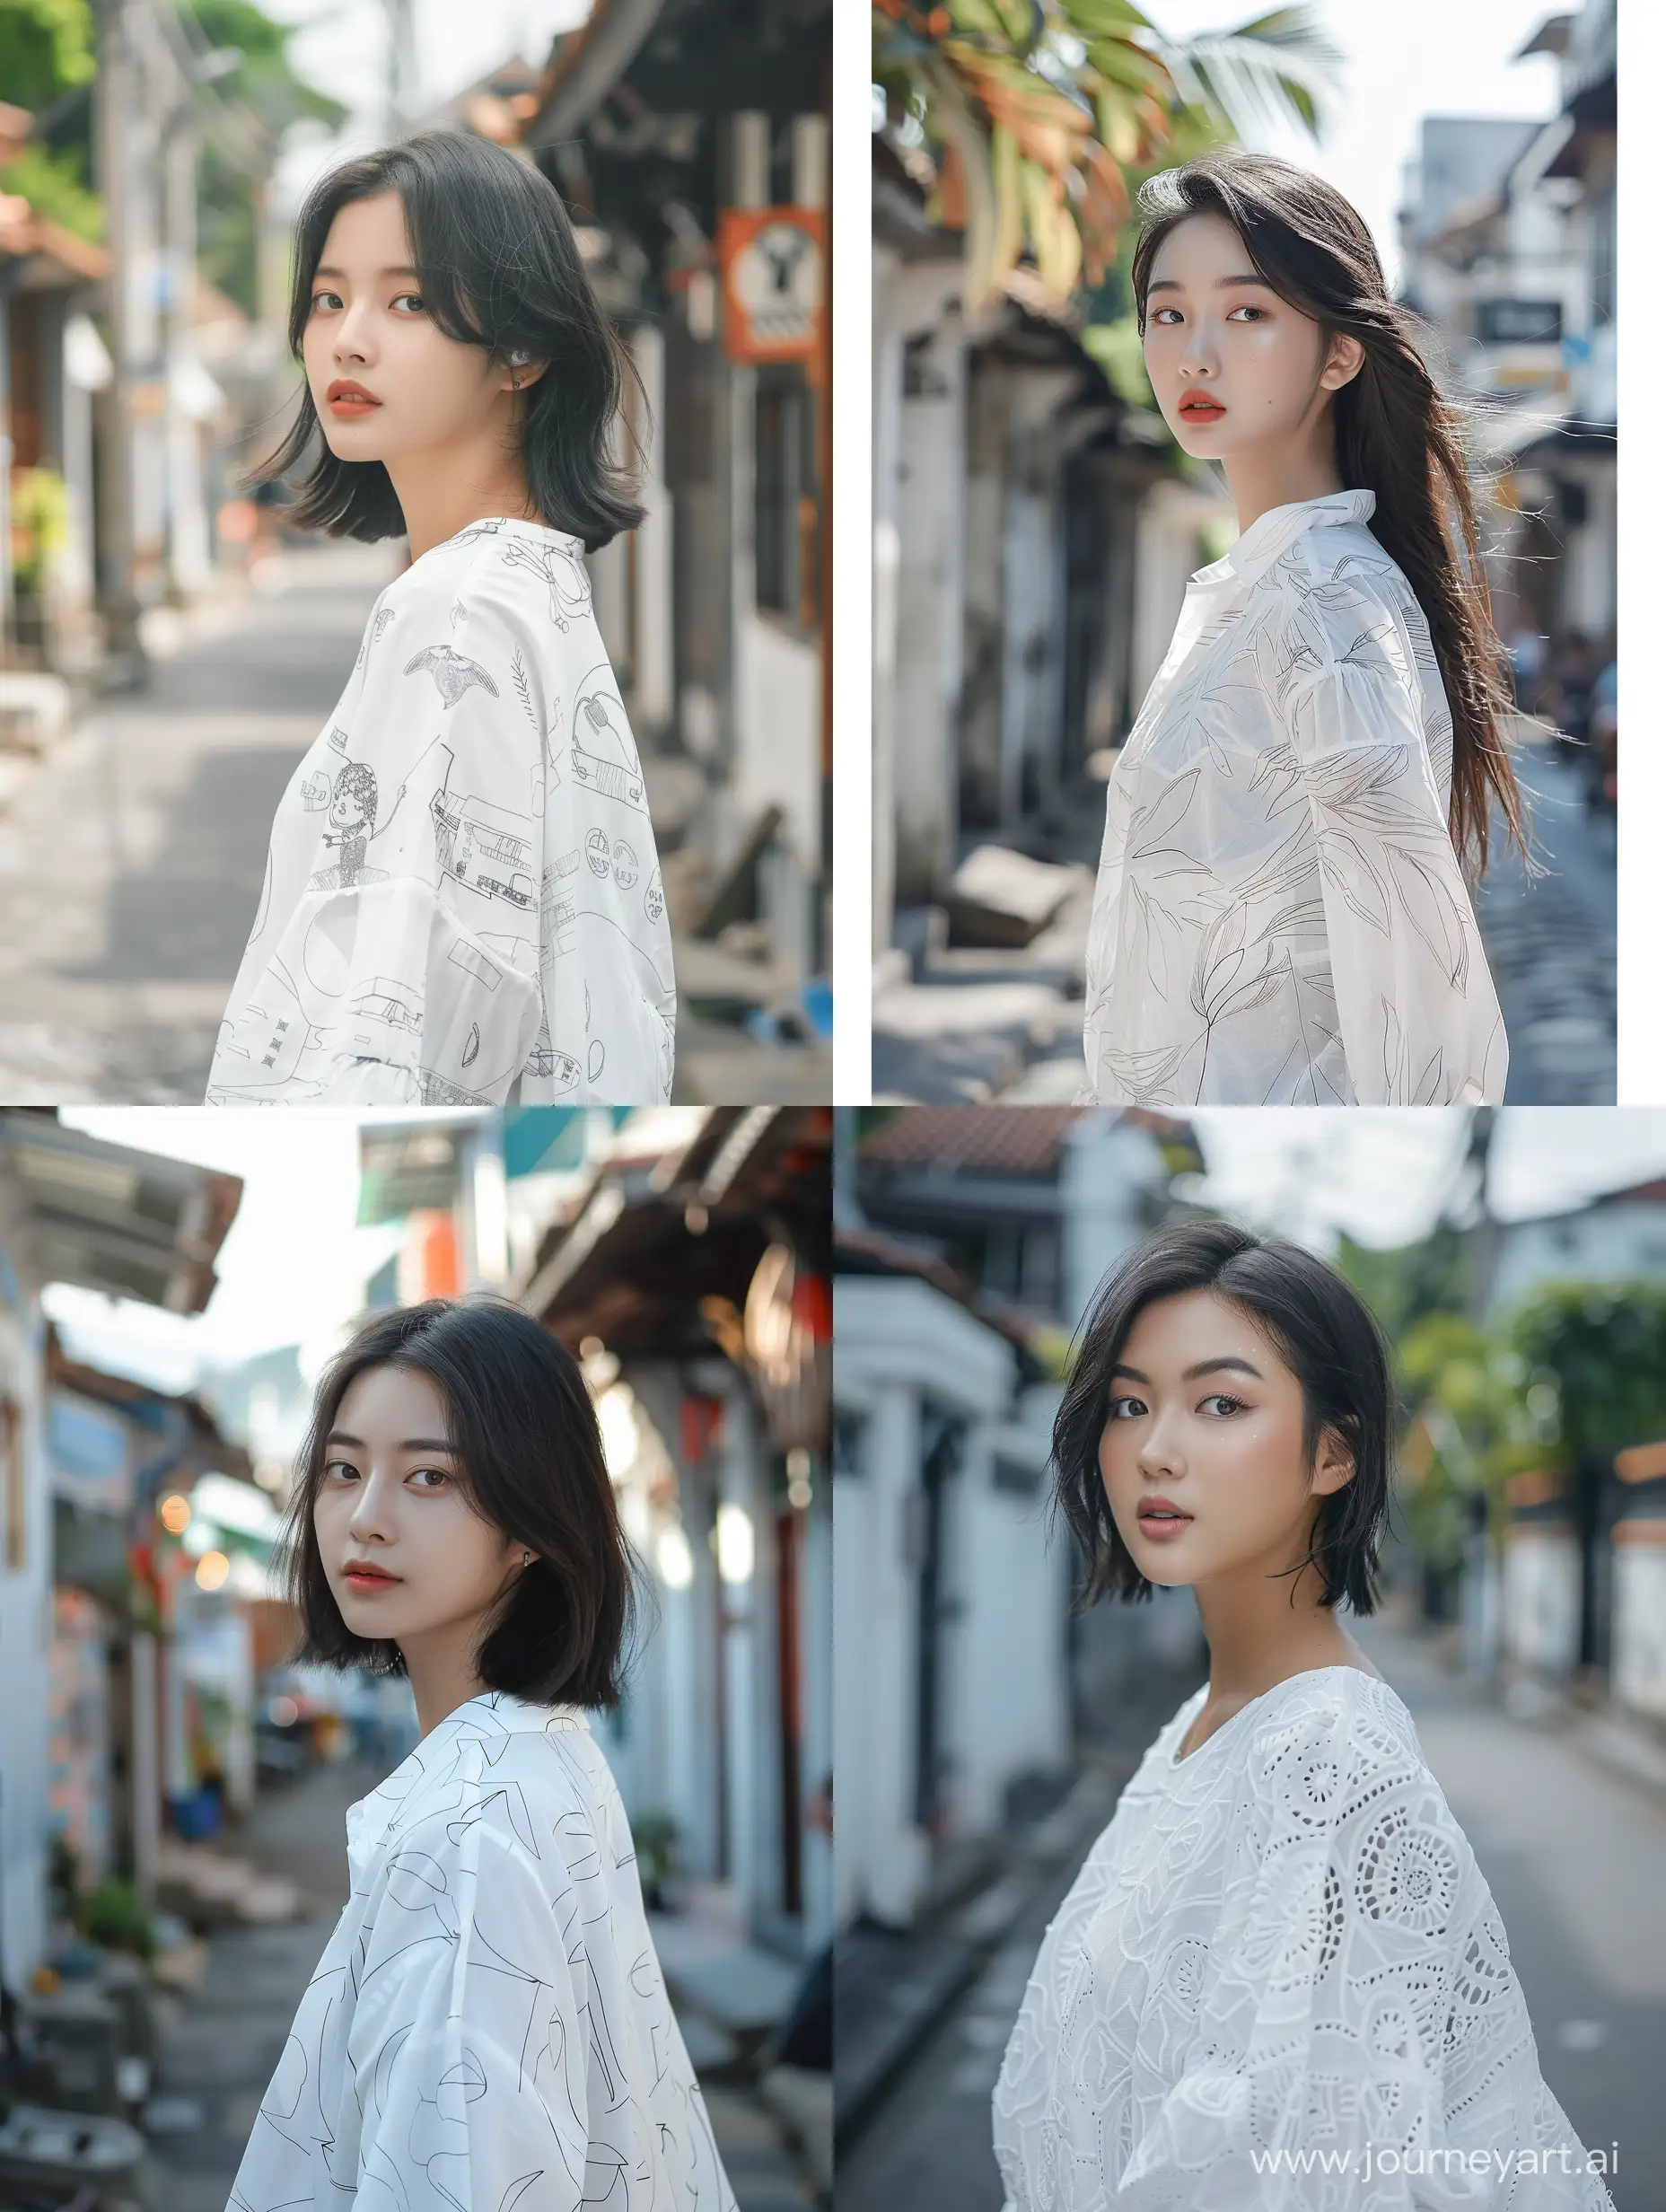 A beautiful Asian woman ,wearing white oversize motived blouse standing on indonesian street,profile,headshot,and facial features resembling Blackpink's Jennie.--v 6